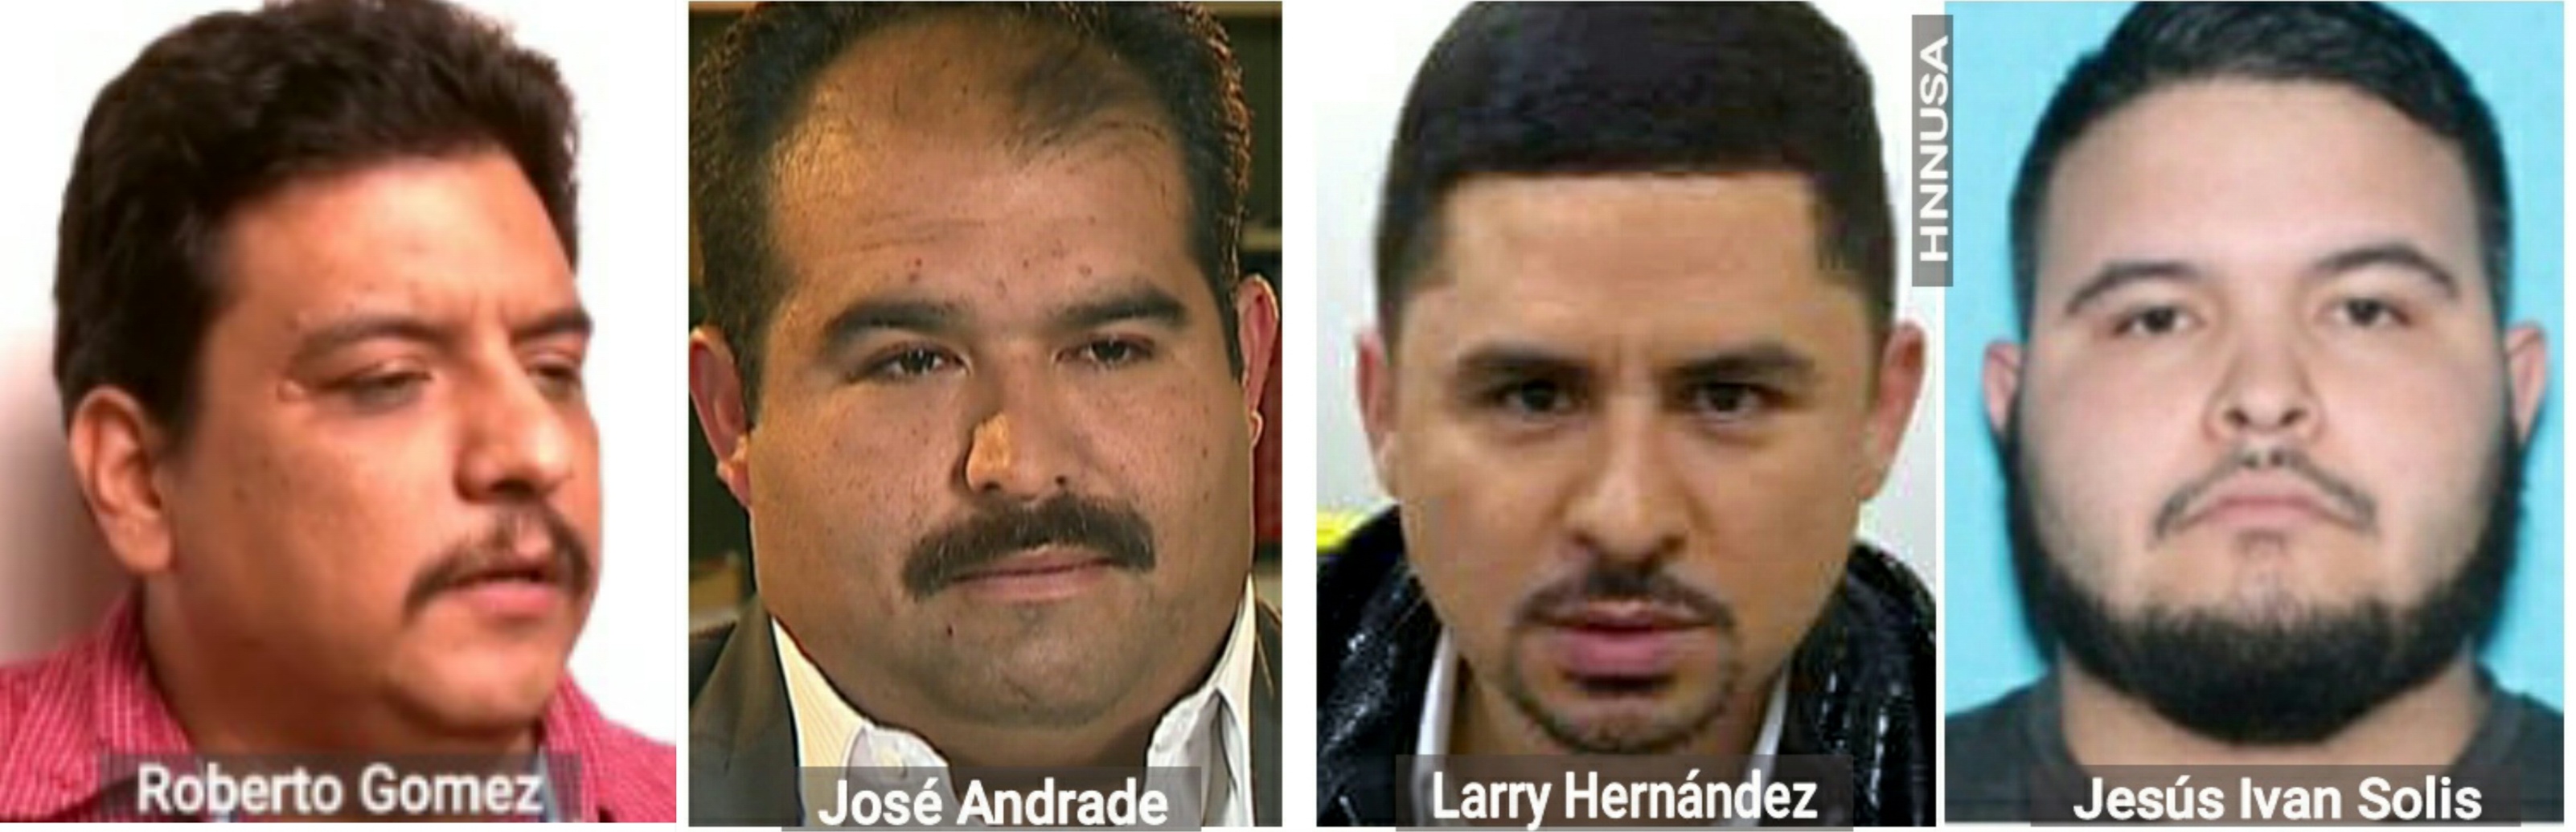 Larry Hernández, Narco Ballad Singer Extradited To S. Carolina To Face Kidn...